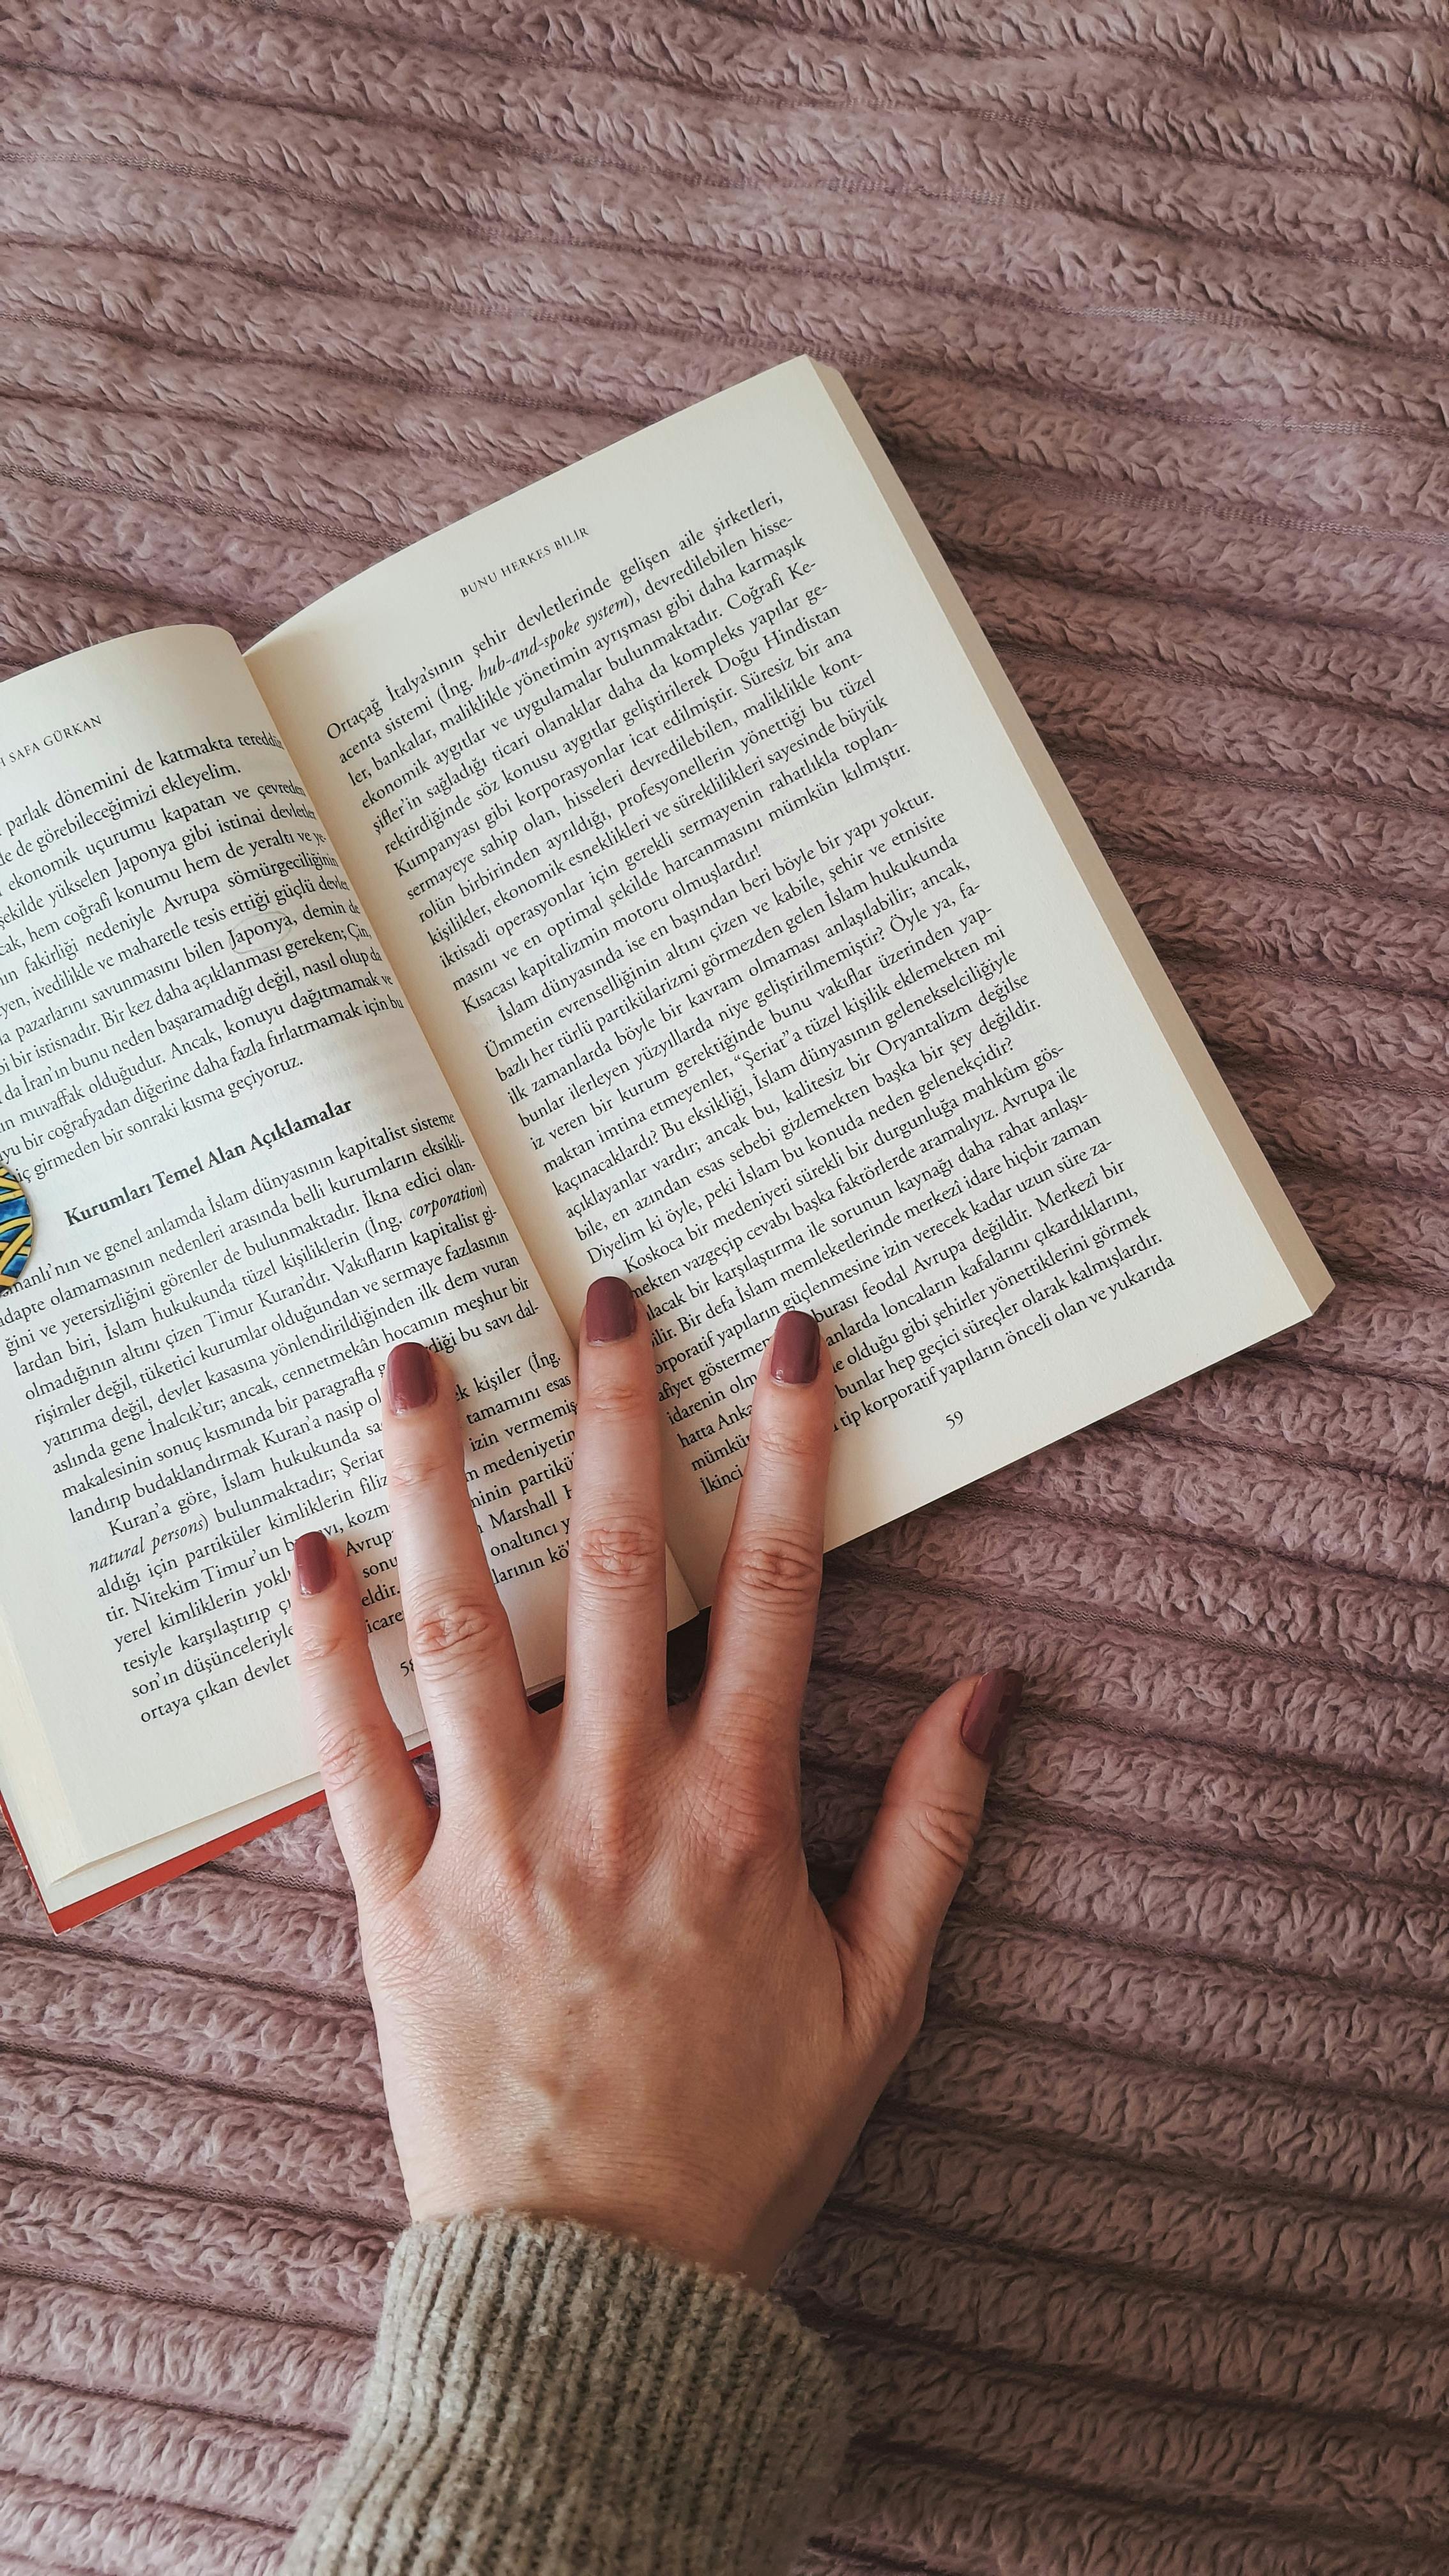 A woman's hand over a book | Source: Pexels